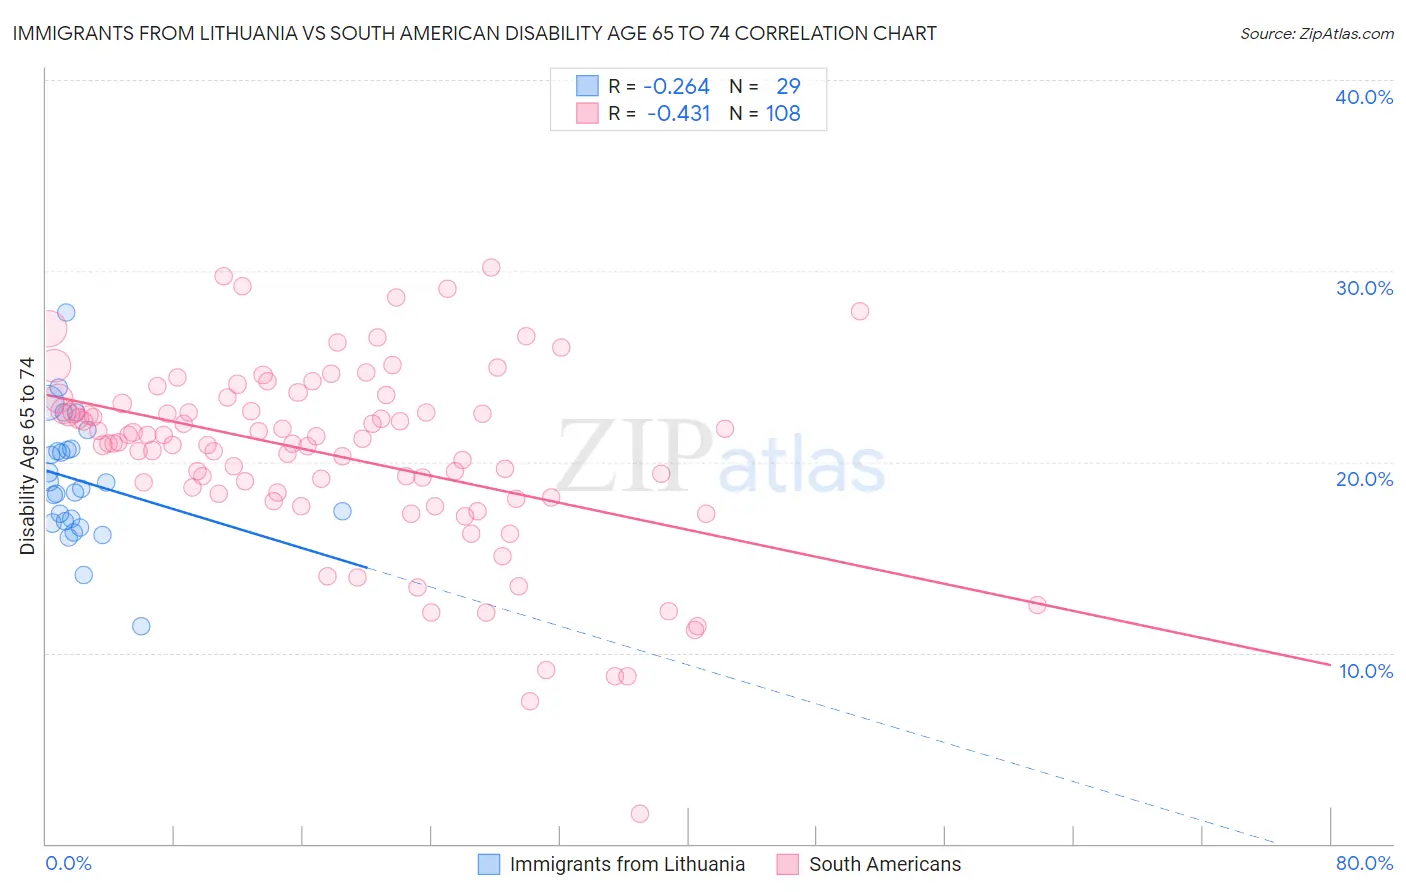 Immigrants from Lithuania vs South American Disability Age 65 to 74